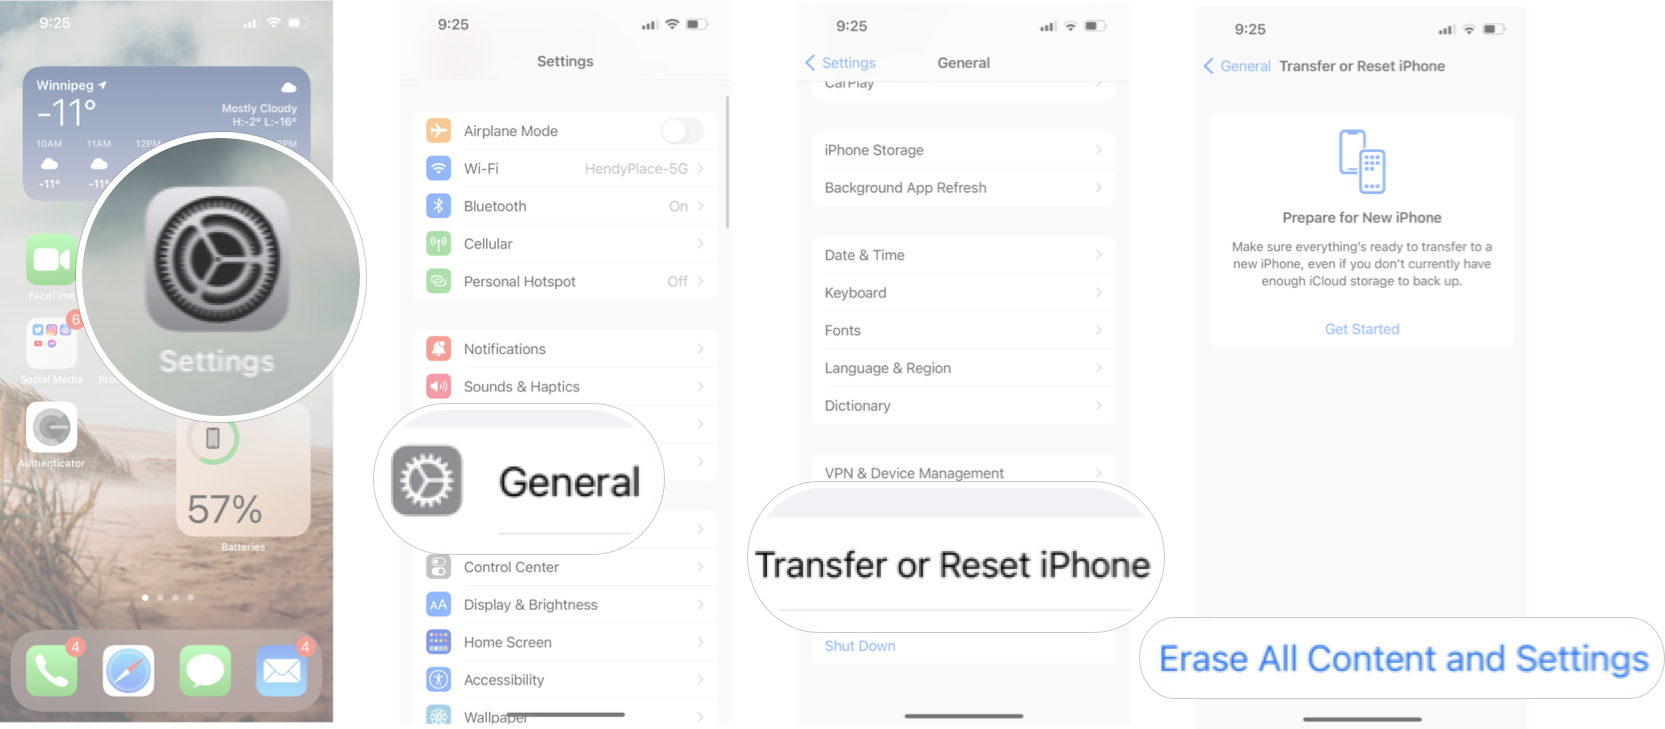 Erasing All Content And Settings in iOS 15: Launch settings, tap general, tap transfer or reset iPhone, and then tap erase all content and settings.